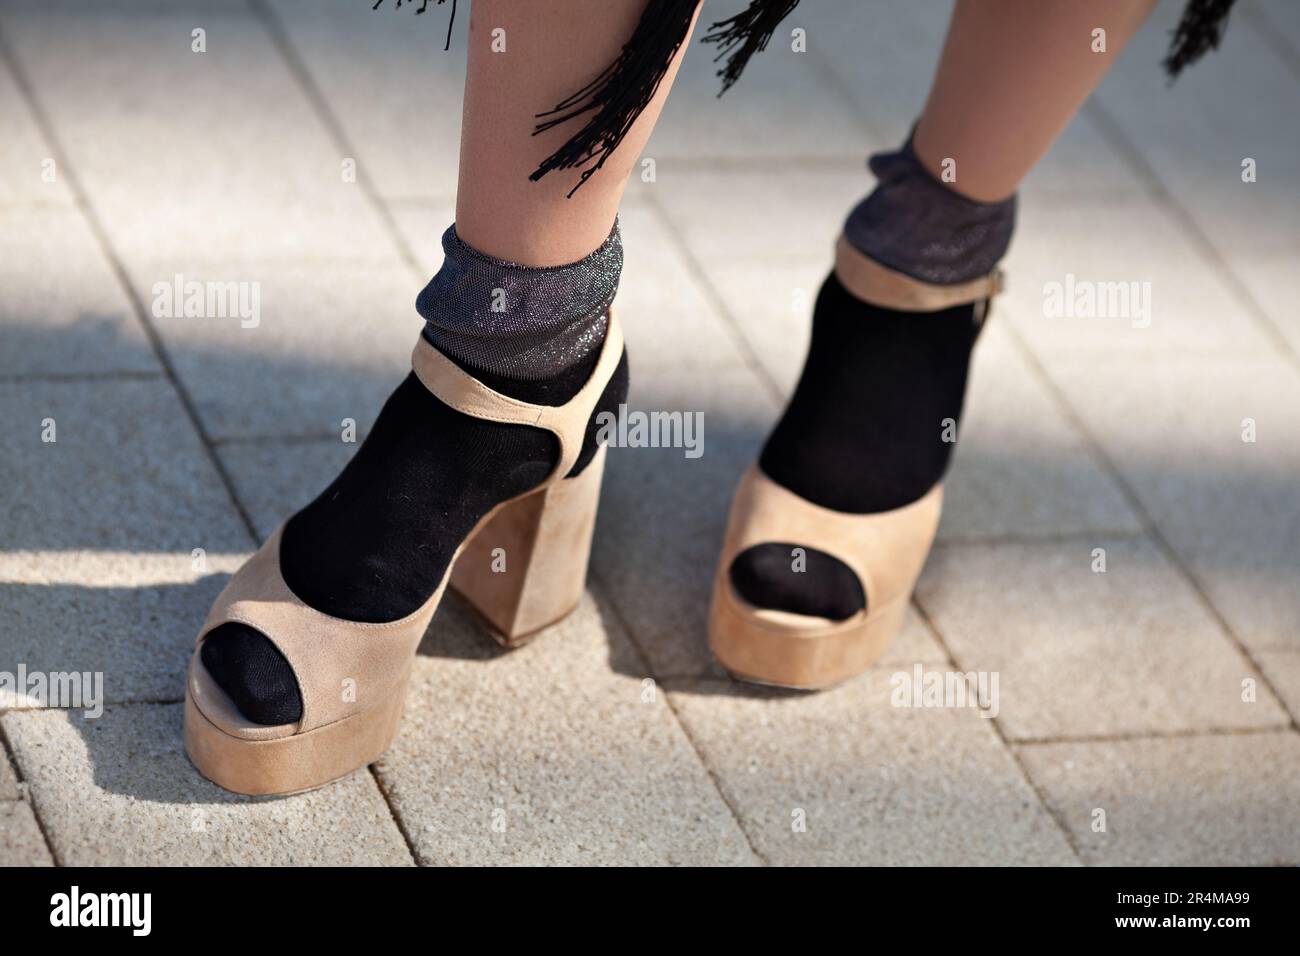 Close up Female legs in socks and open toed sandals on high heels. Stylish clothes and shoes. Trend fashion style. Stock Photo